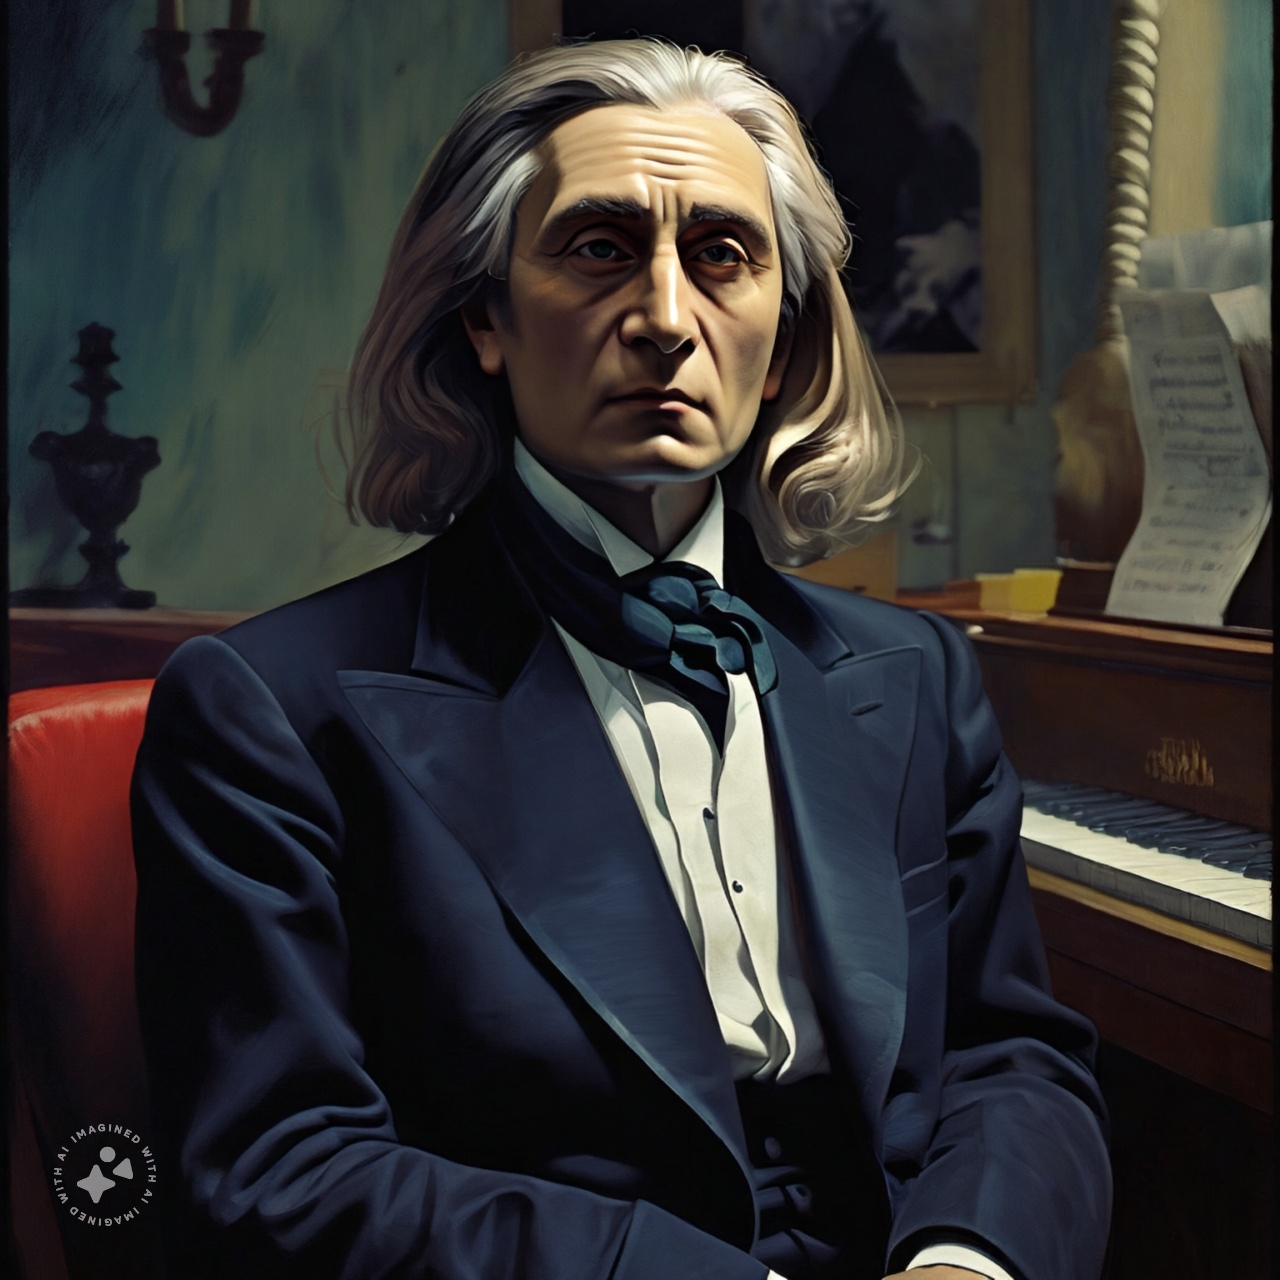 "Rockstar of His Age: The Pivotal Piano Duel between Franz Liszt and Sigismond Thalberg"